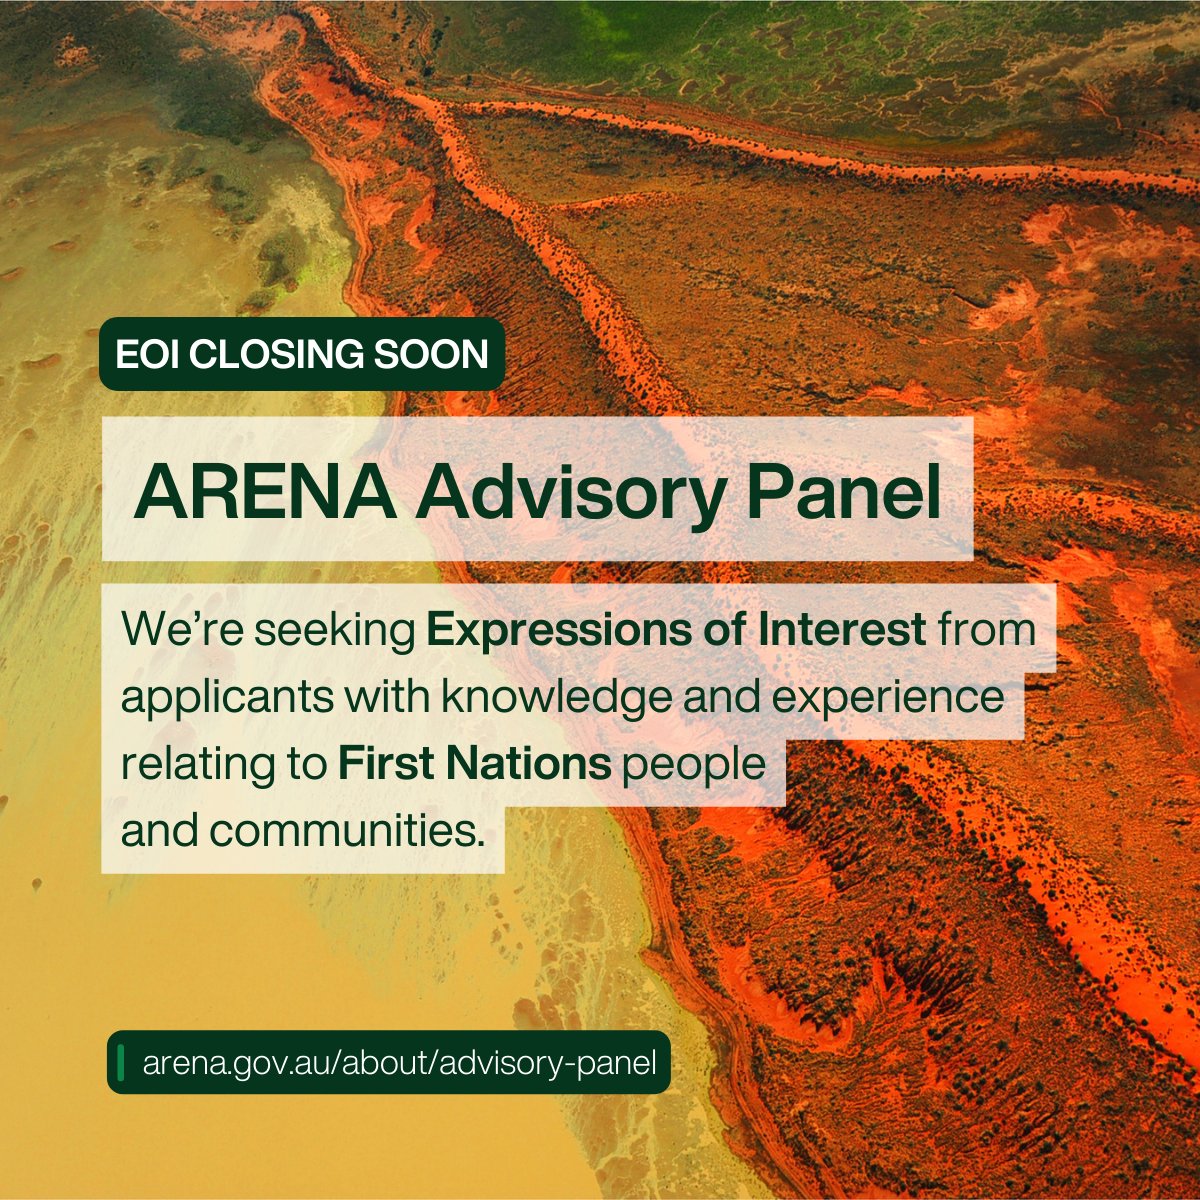 📅Reminder: ARENA Advisory Panel applications closing soon. Do you have knowledge and experience relating to First Nations people and communities? We want to hear from you. ⏰Submit your EOI before 13 May: arena.gov.au/about/advisory…